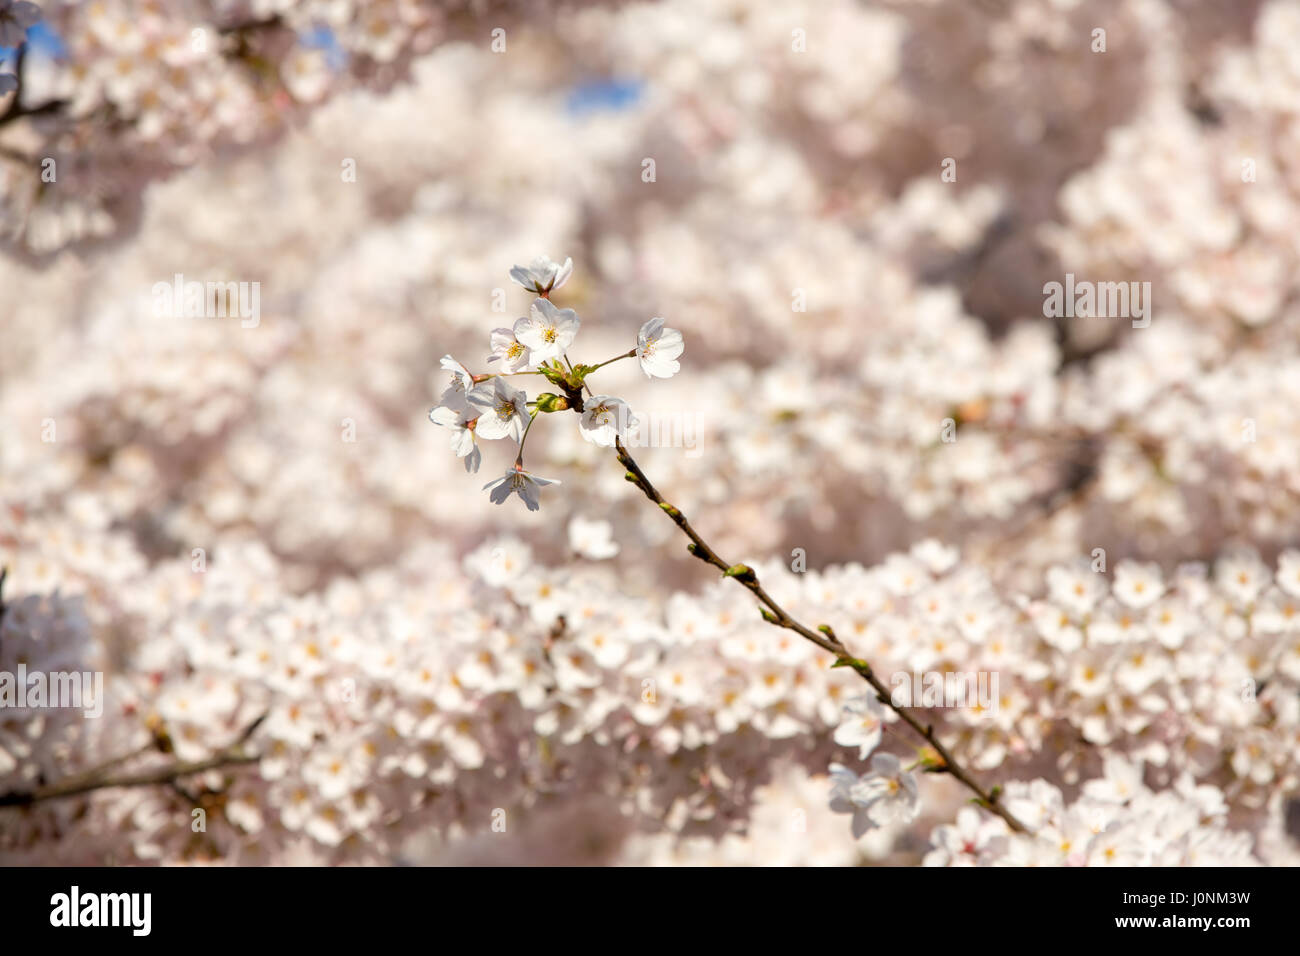 A branch of blossom flowers in front of a blurry background of blossoms. Stock Photo